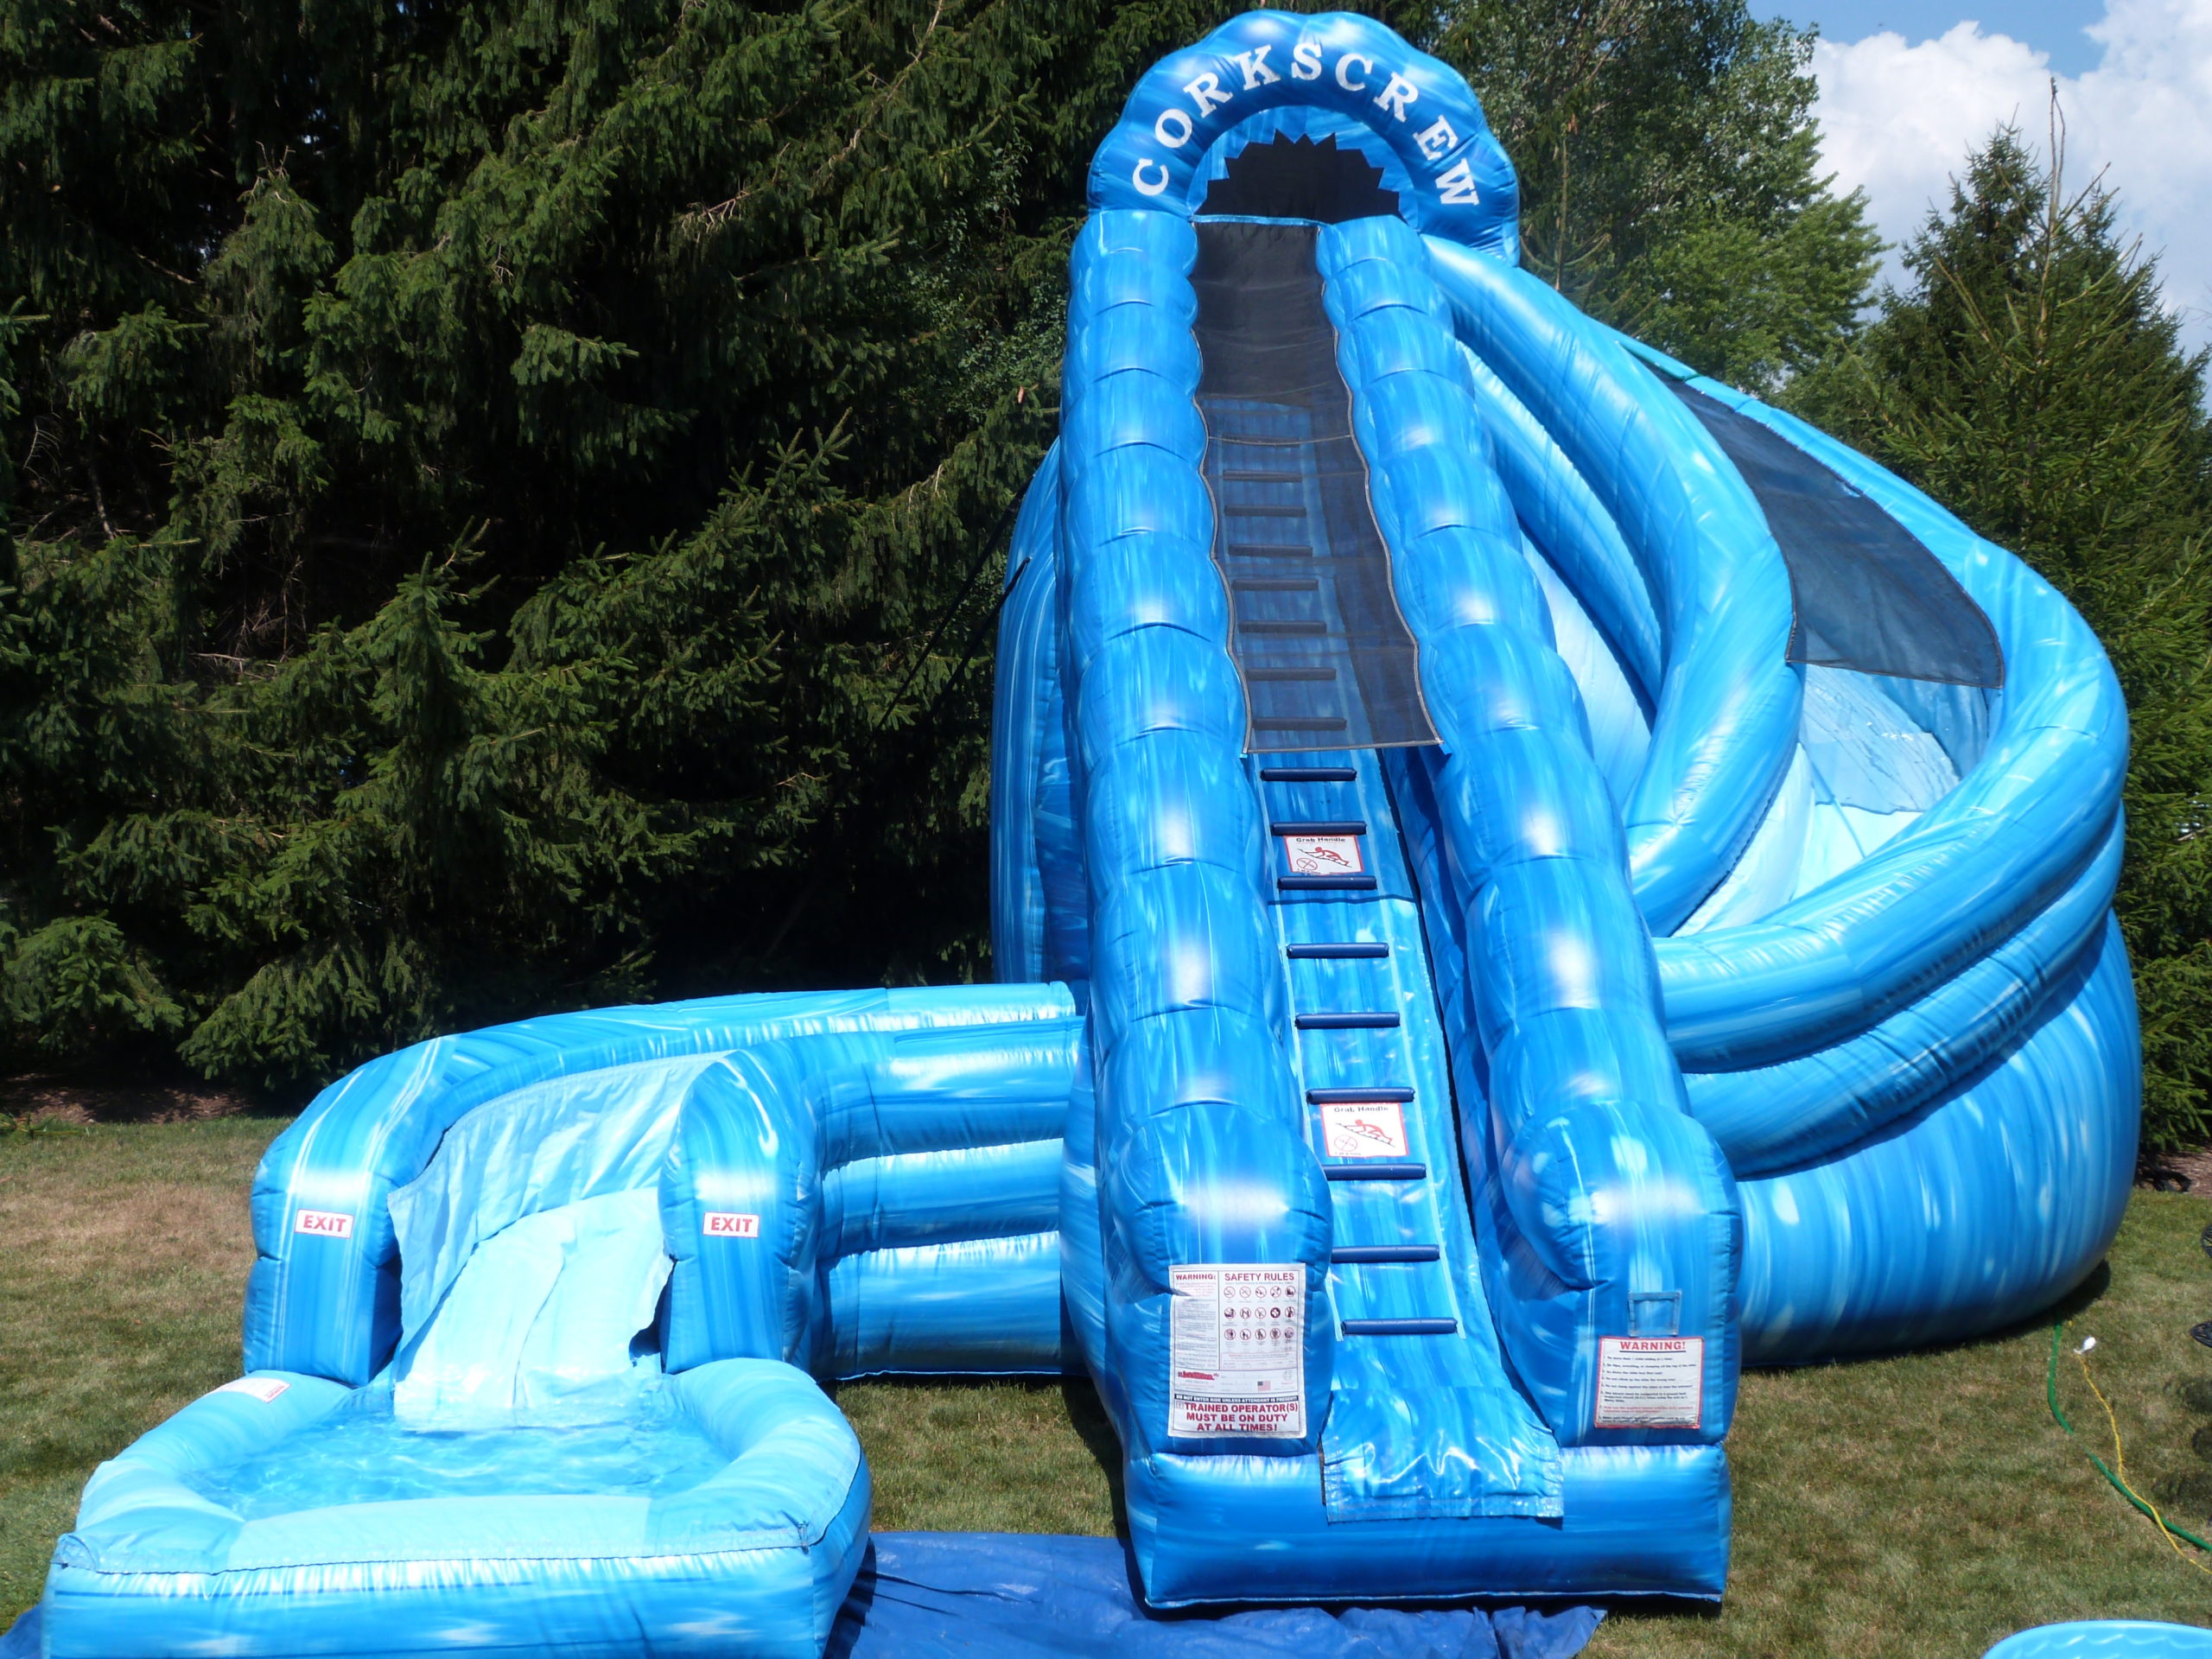 Naperville water slide rental. This water slide was the most popular item at the party!